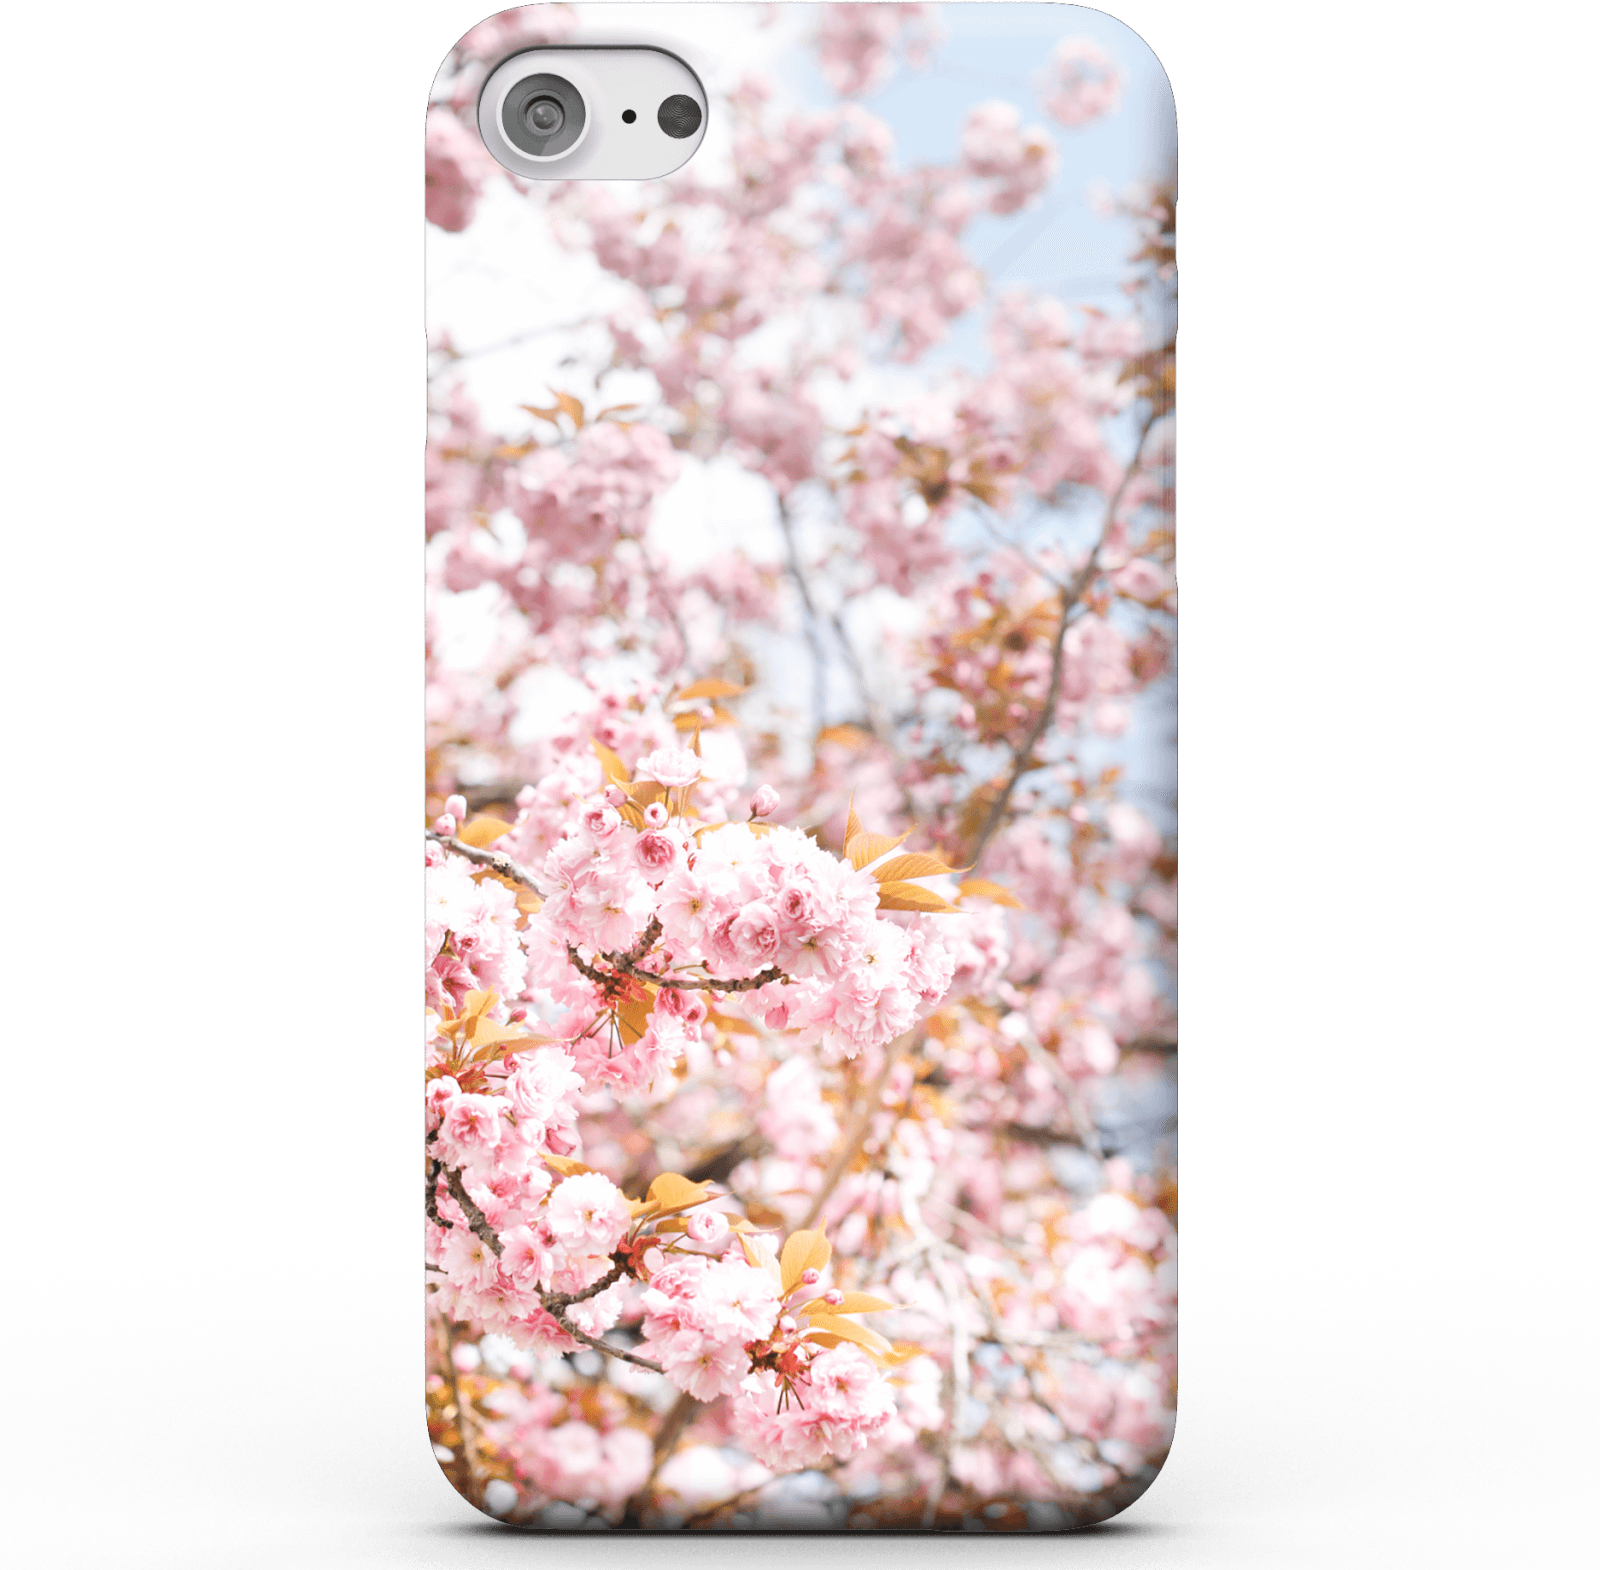 Blossom Close Up Phone Case for iPhone and Android - iPhone 5/5s - Snap Case - Matte